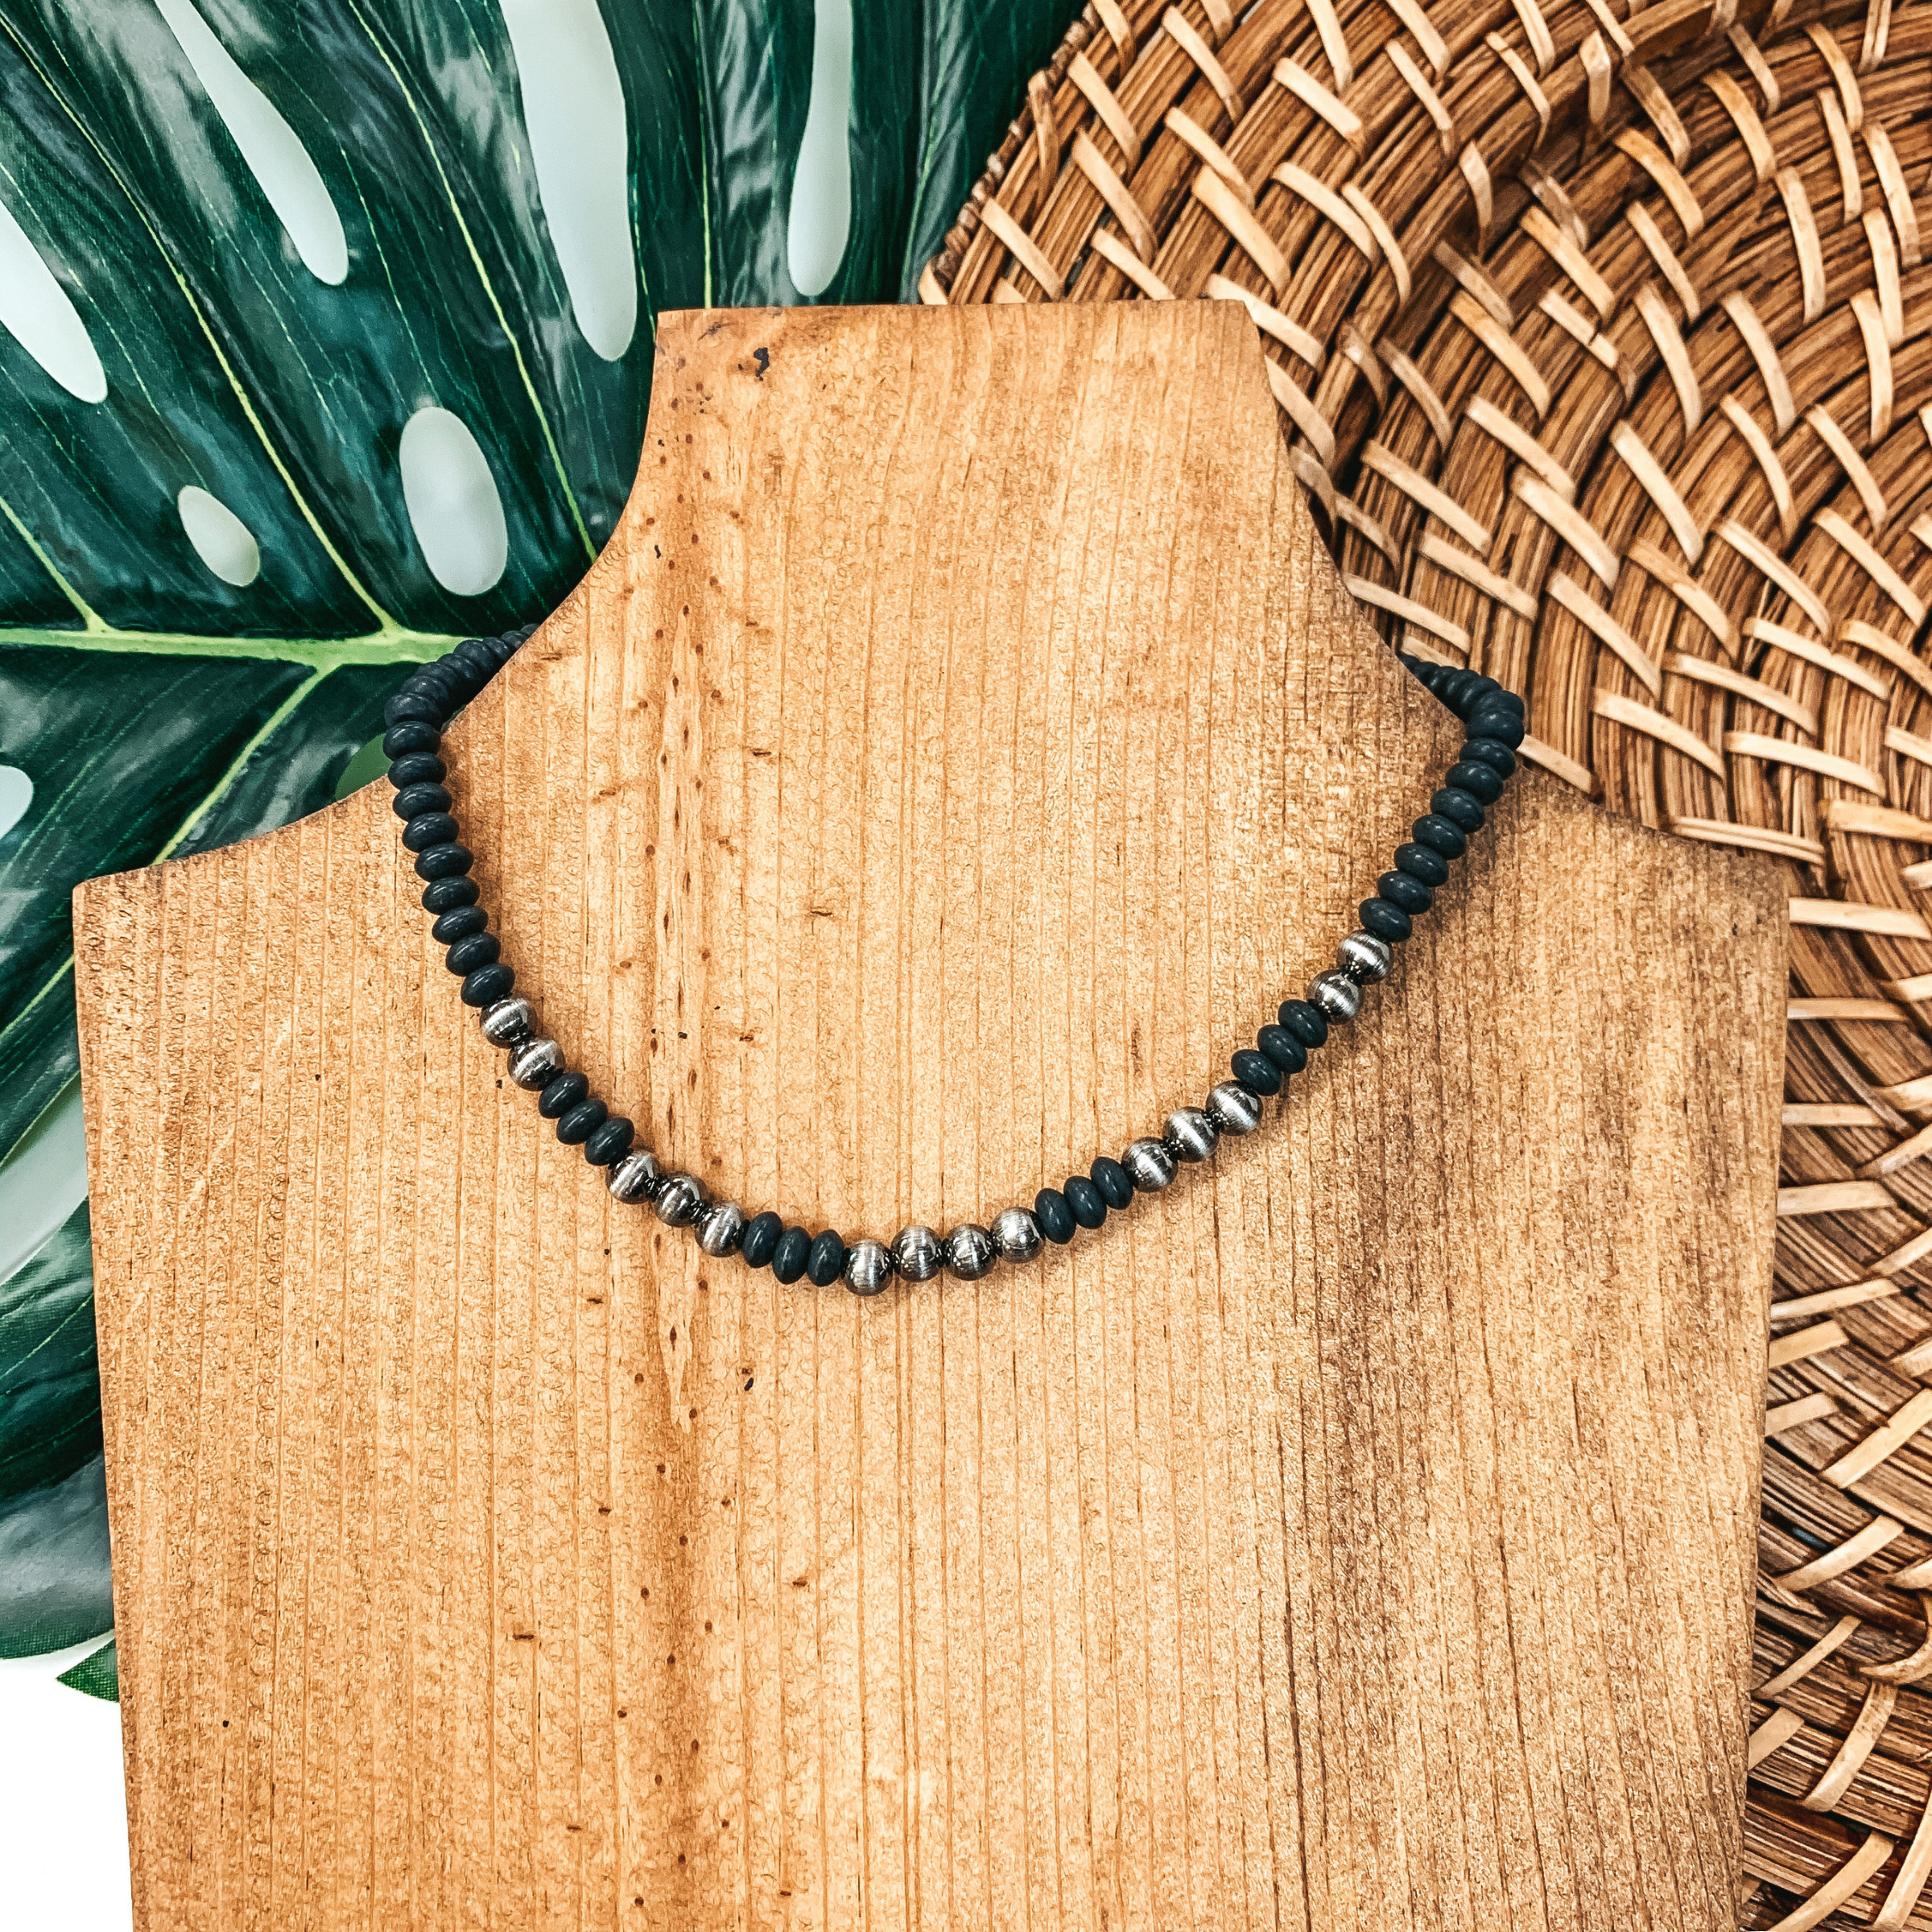 Beaded Stone Choker Necklace with Navajo Beads In Black - Giddy Up Glamour Boutique